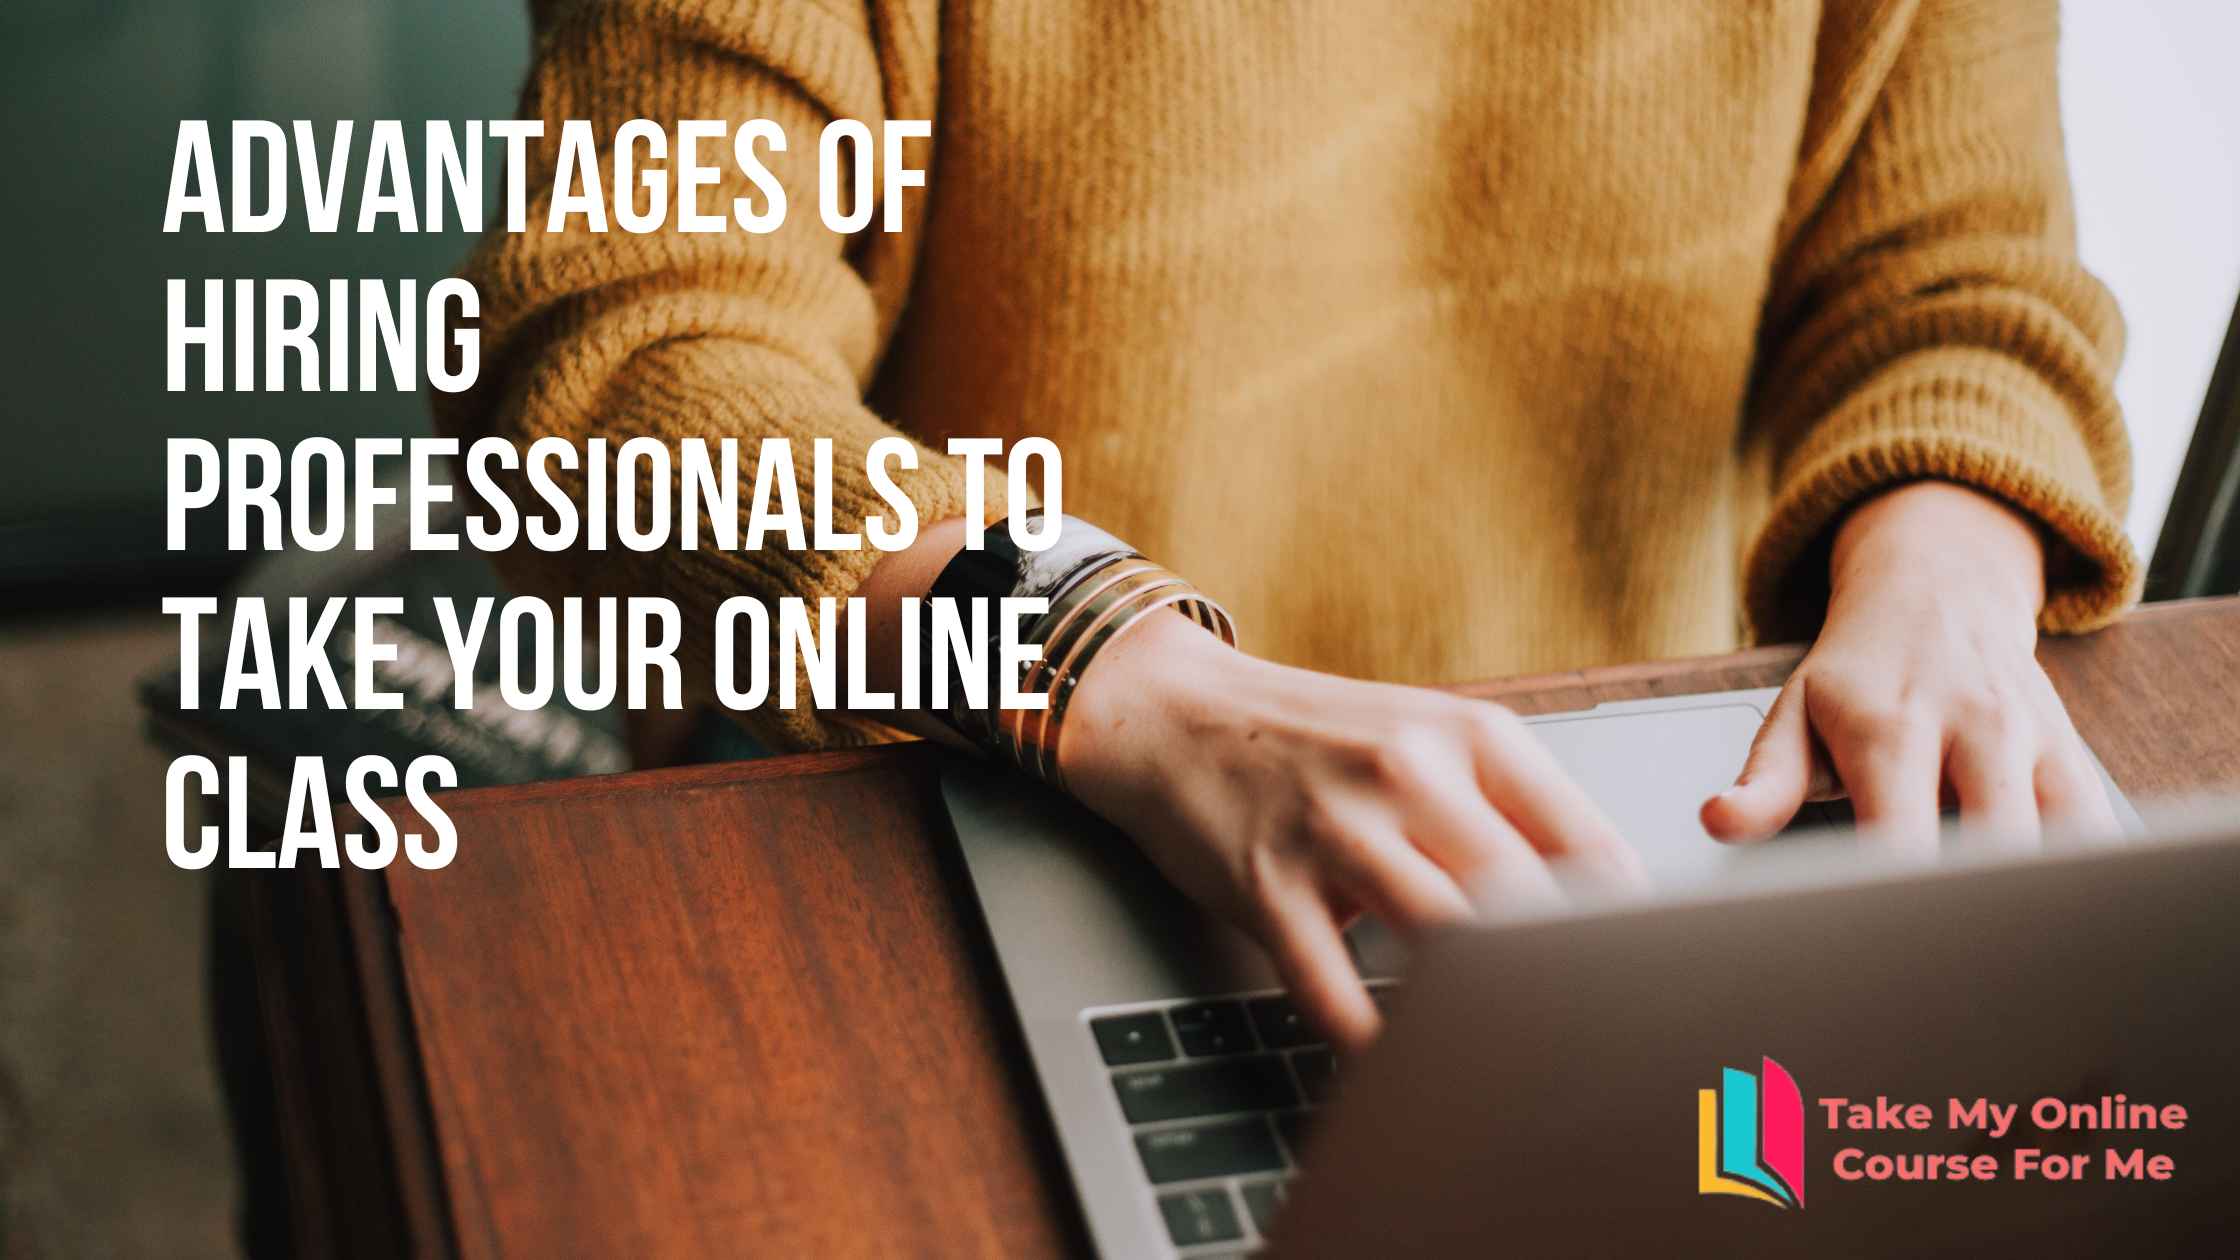 Advantages of Hiring Professionals to Take Your Online Class